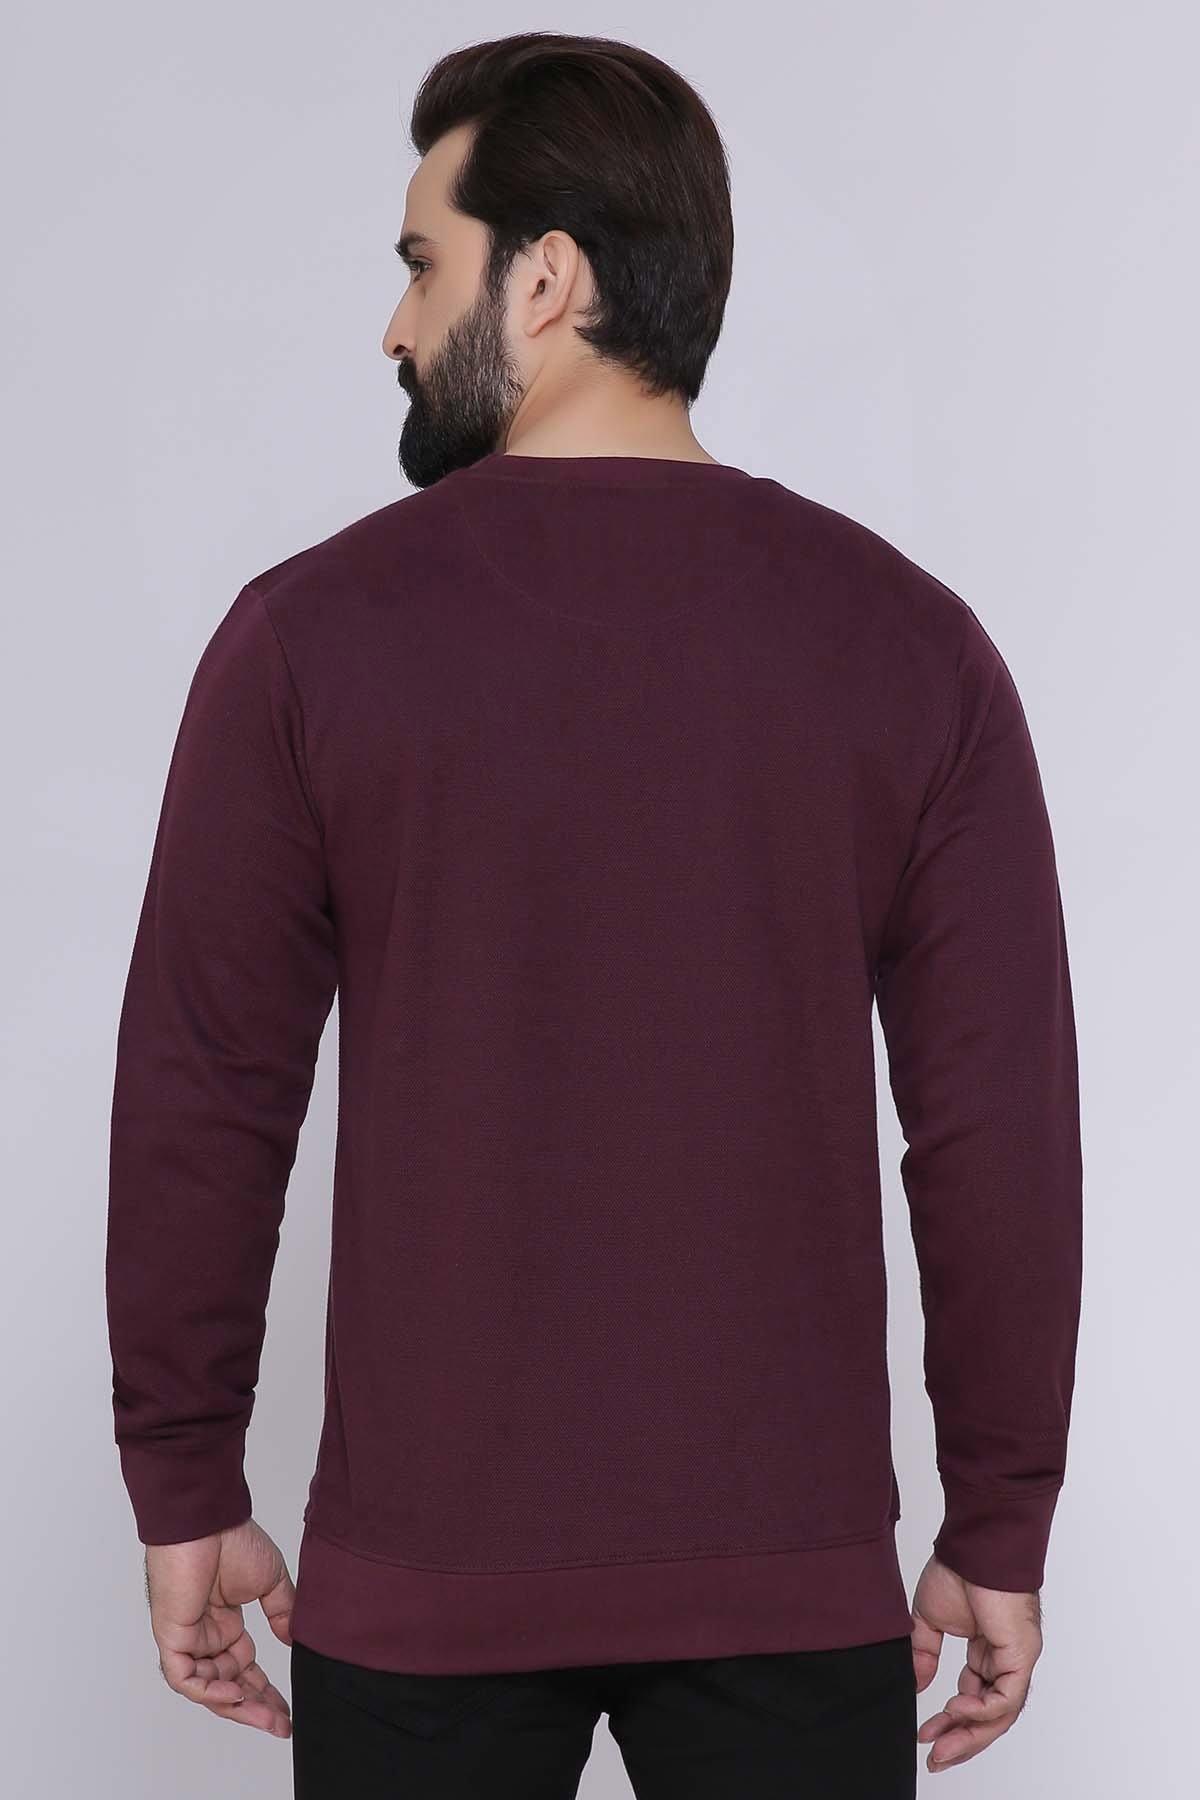 PIQUE TERRY SWEAT SHIRT MAROON at Charcoal Clothing